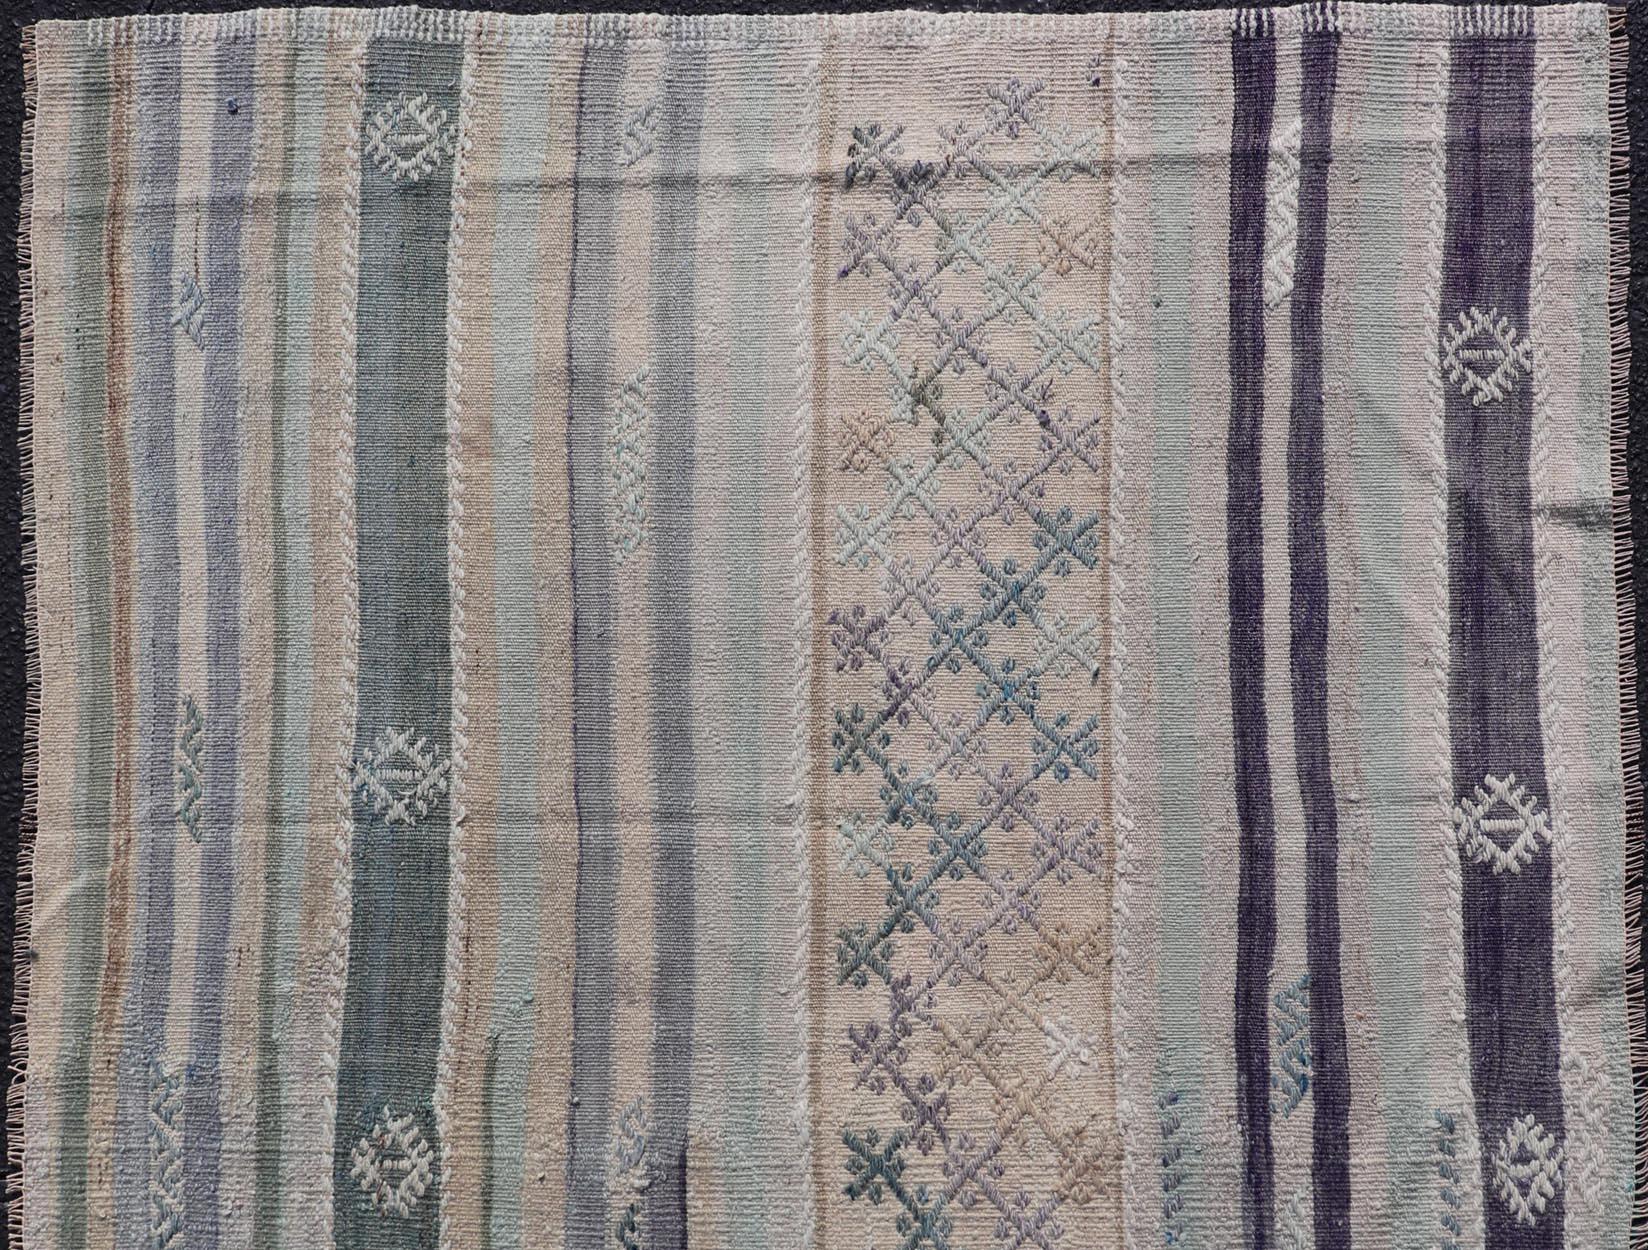 Wool Vintage Turkish Embroidered Kilim in Stripes in Shades of Gray, and Light Green For Sale